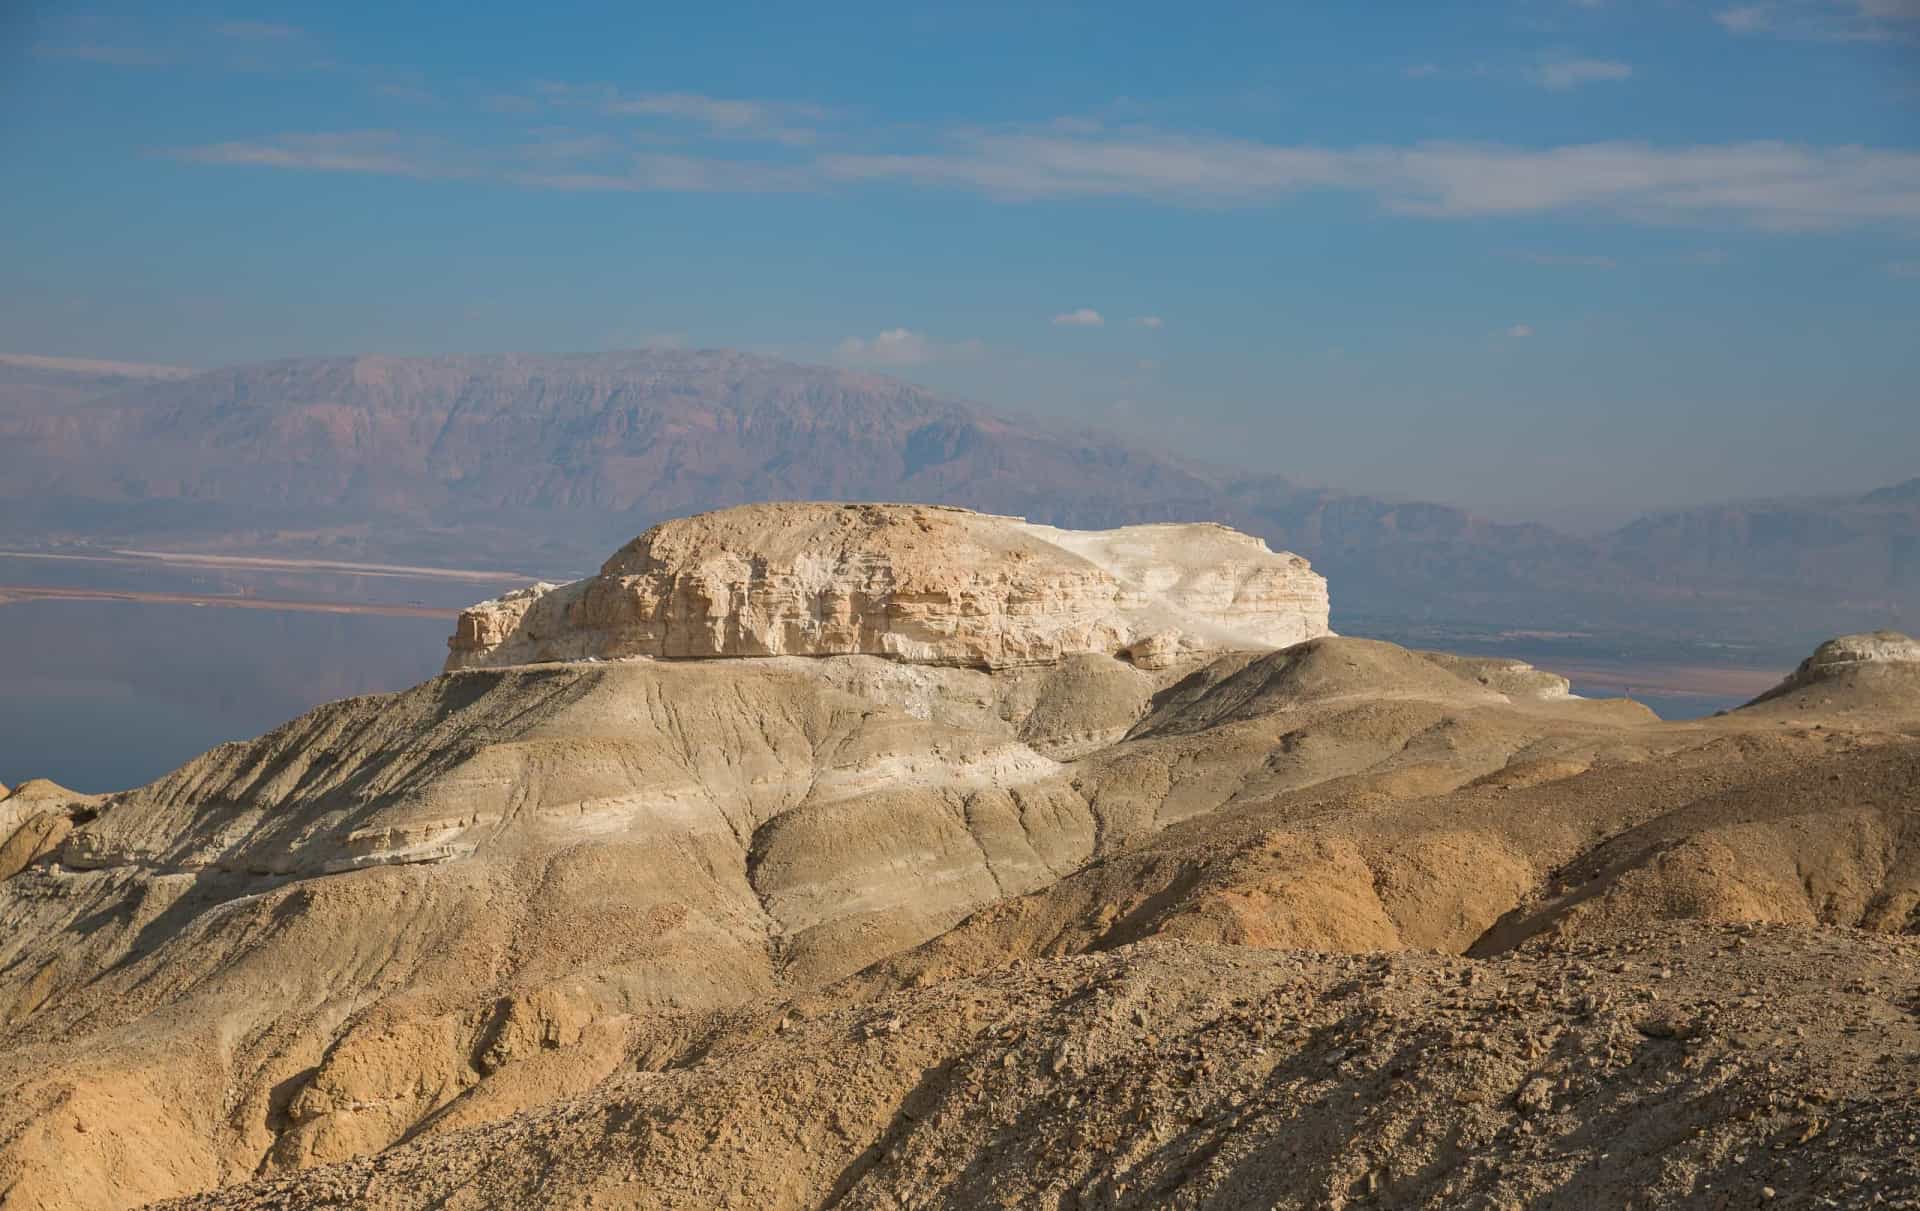 <p>Taking its name from the legendary city of Sodom, whose destruction along with Gomorrah is the subject of a narrative in the Bible, Mount Sodom is made up almost entirely of rock salt. It stands along the southwestern part of the Dead Sea in Israel.</p>